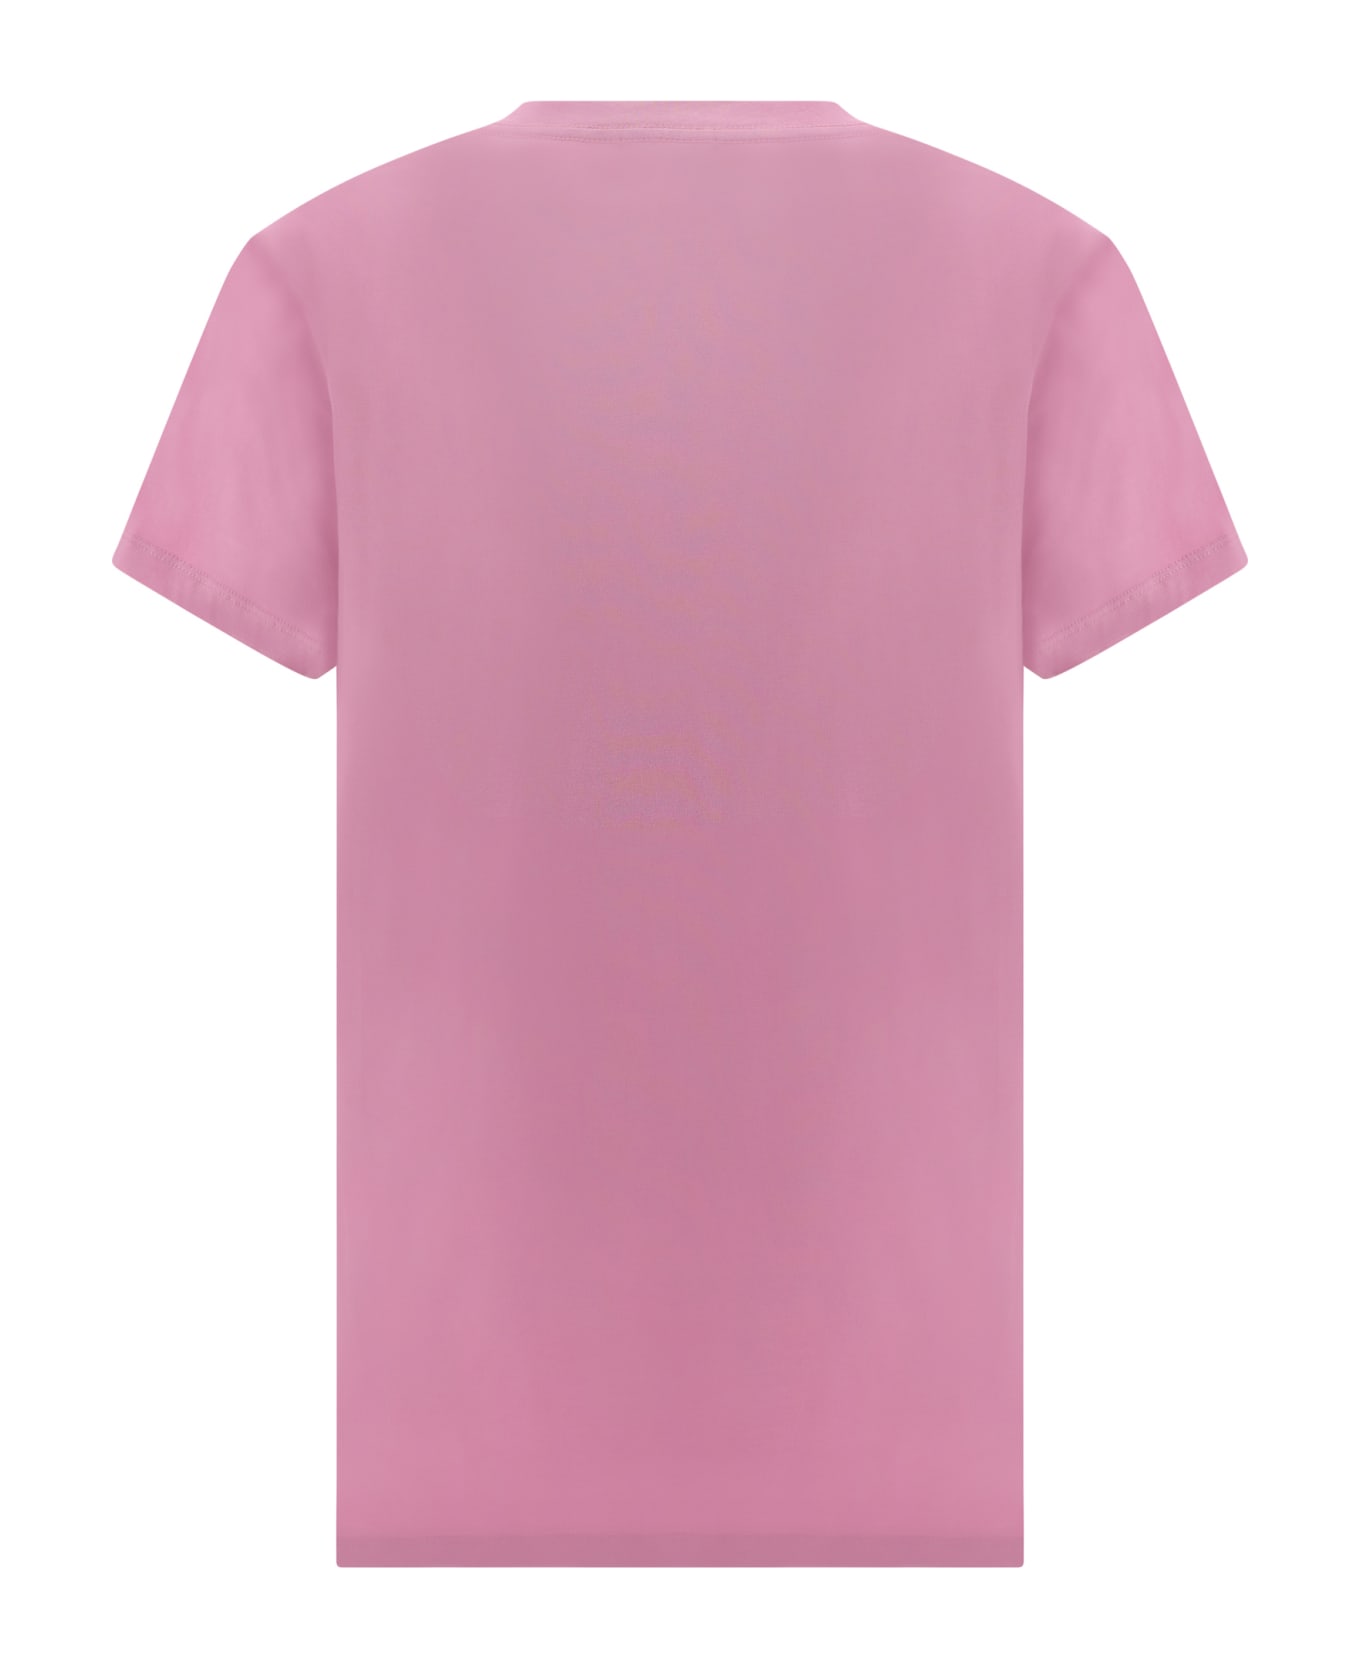 Isabel Marant Aby T-shirt